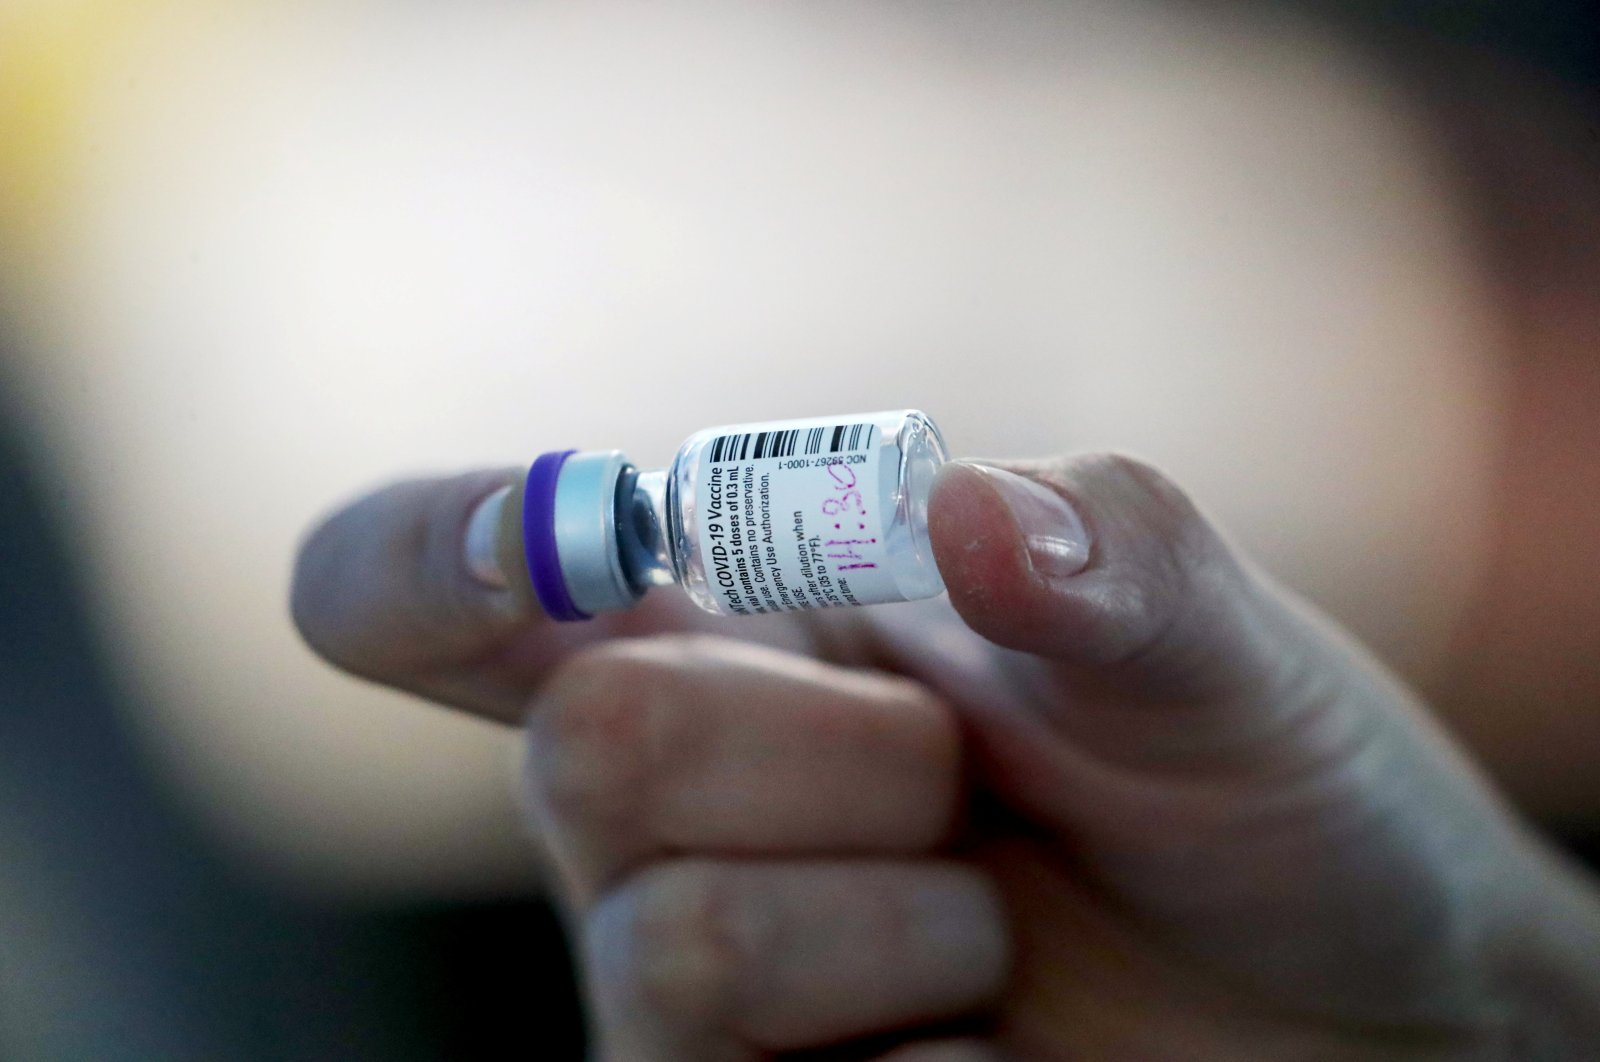 A nurse prepares a dose of the Pfizer/BioNtech vaccine against the coronavirus disease (COVID-19) at the Posta Central hospital in Santiago, Chile, Dec. 24, 2020. (Reuters Photo)